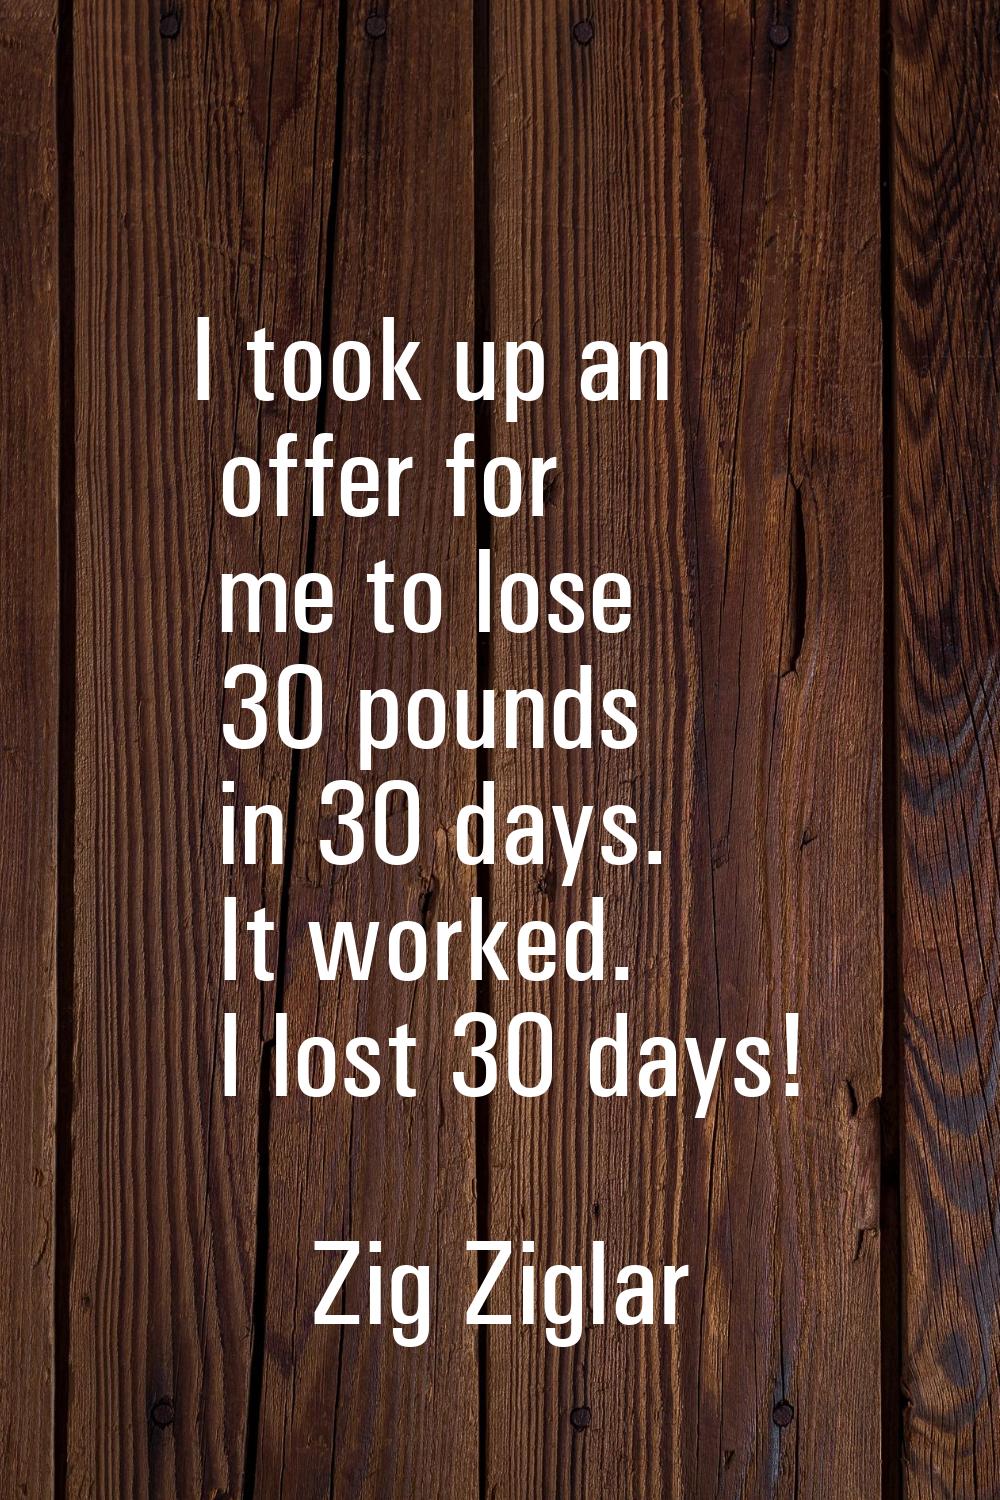 I took up an offer for me to lose 30 pounds in 30 days. It worked. I lost 30 days!